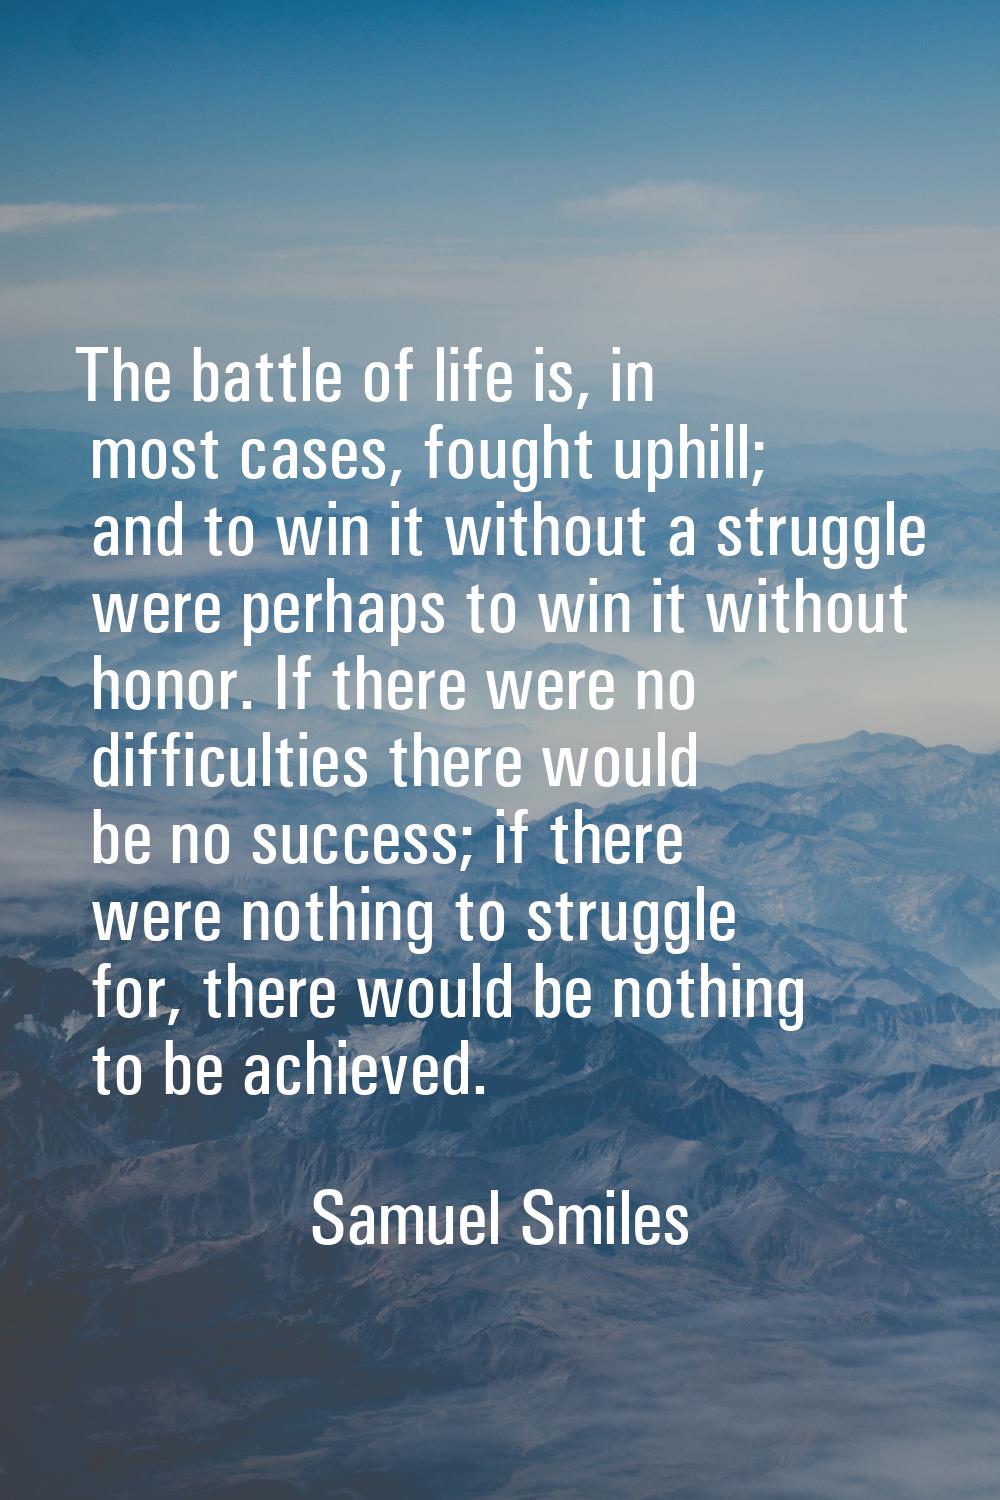 The battle of life is, in most cases, fought uphill; and to win it without a struggle were perhaps 